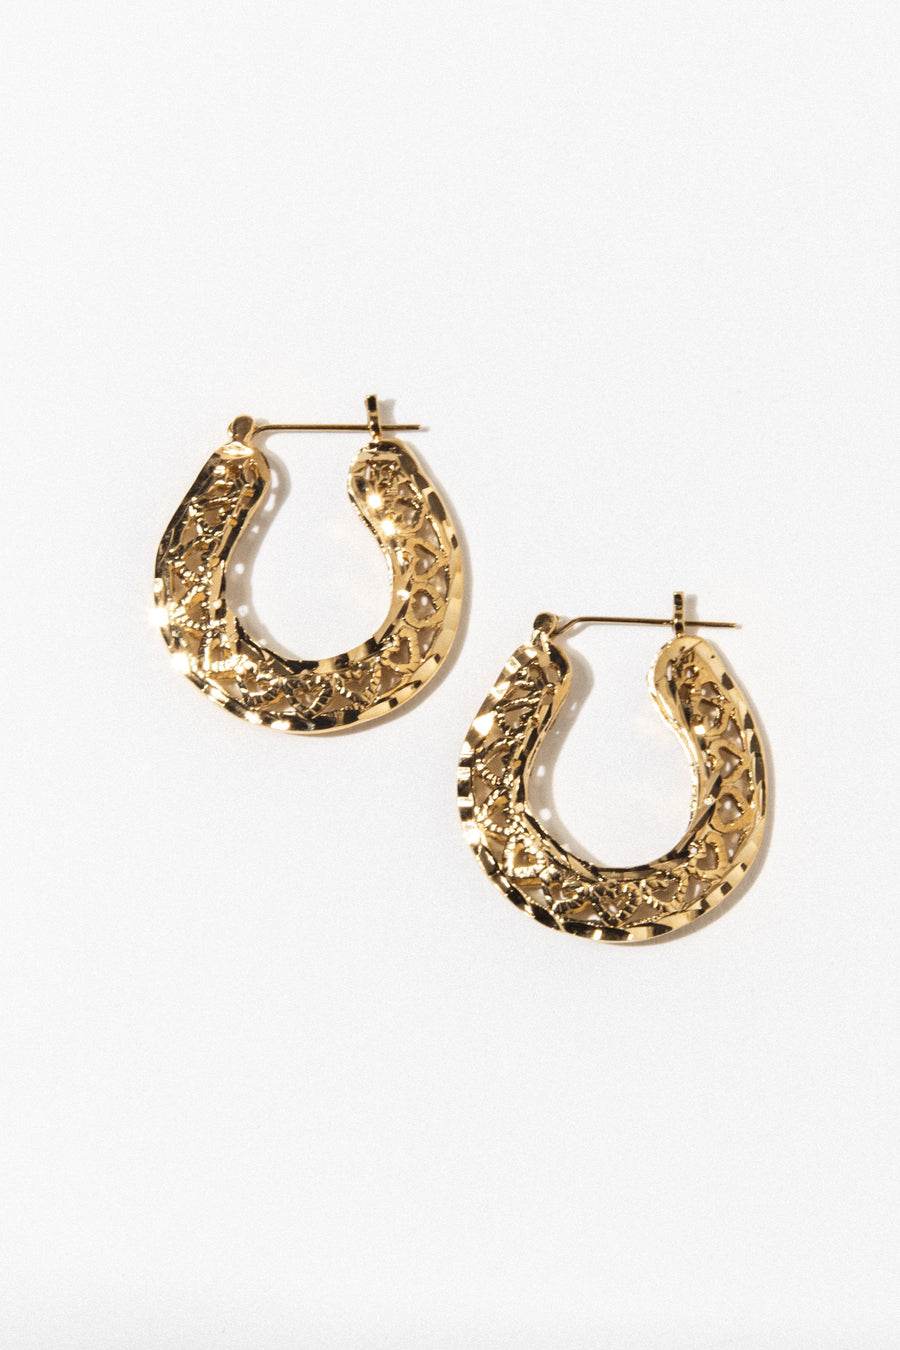 Goddess Jewelry Gold Lover's Club Earrings